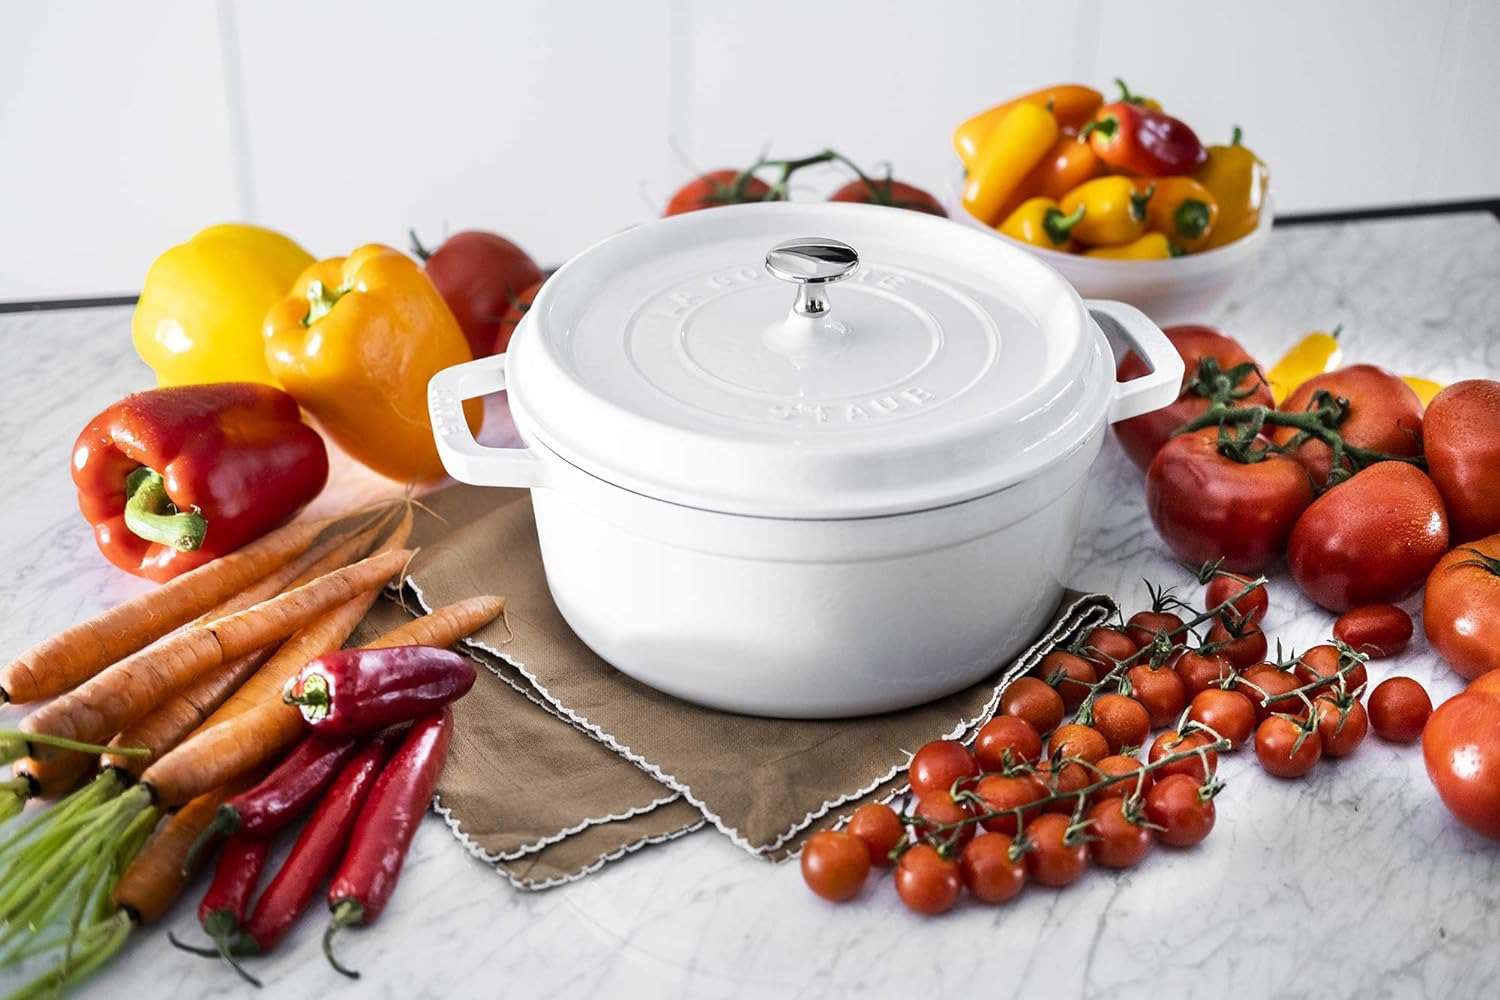 amazon, amazon dropped huge cookware deals ahead of presidents day—including all-clad, le creuset, and lodge